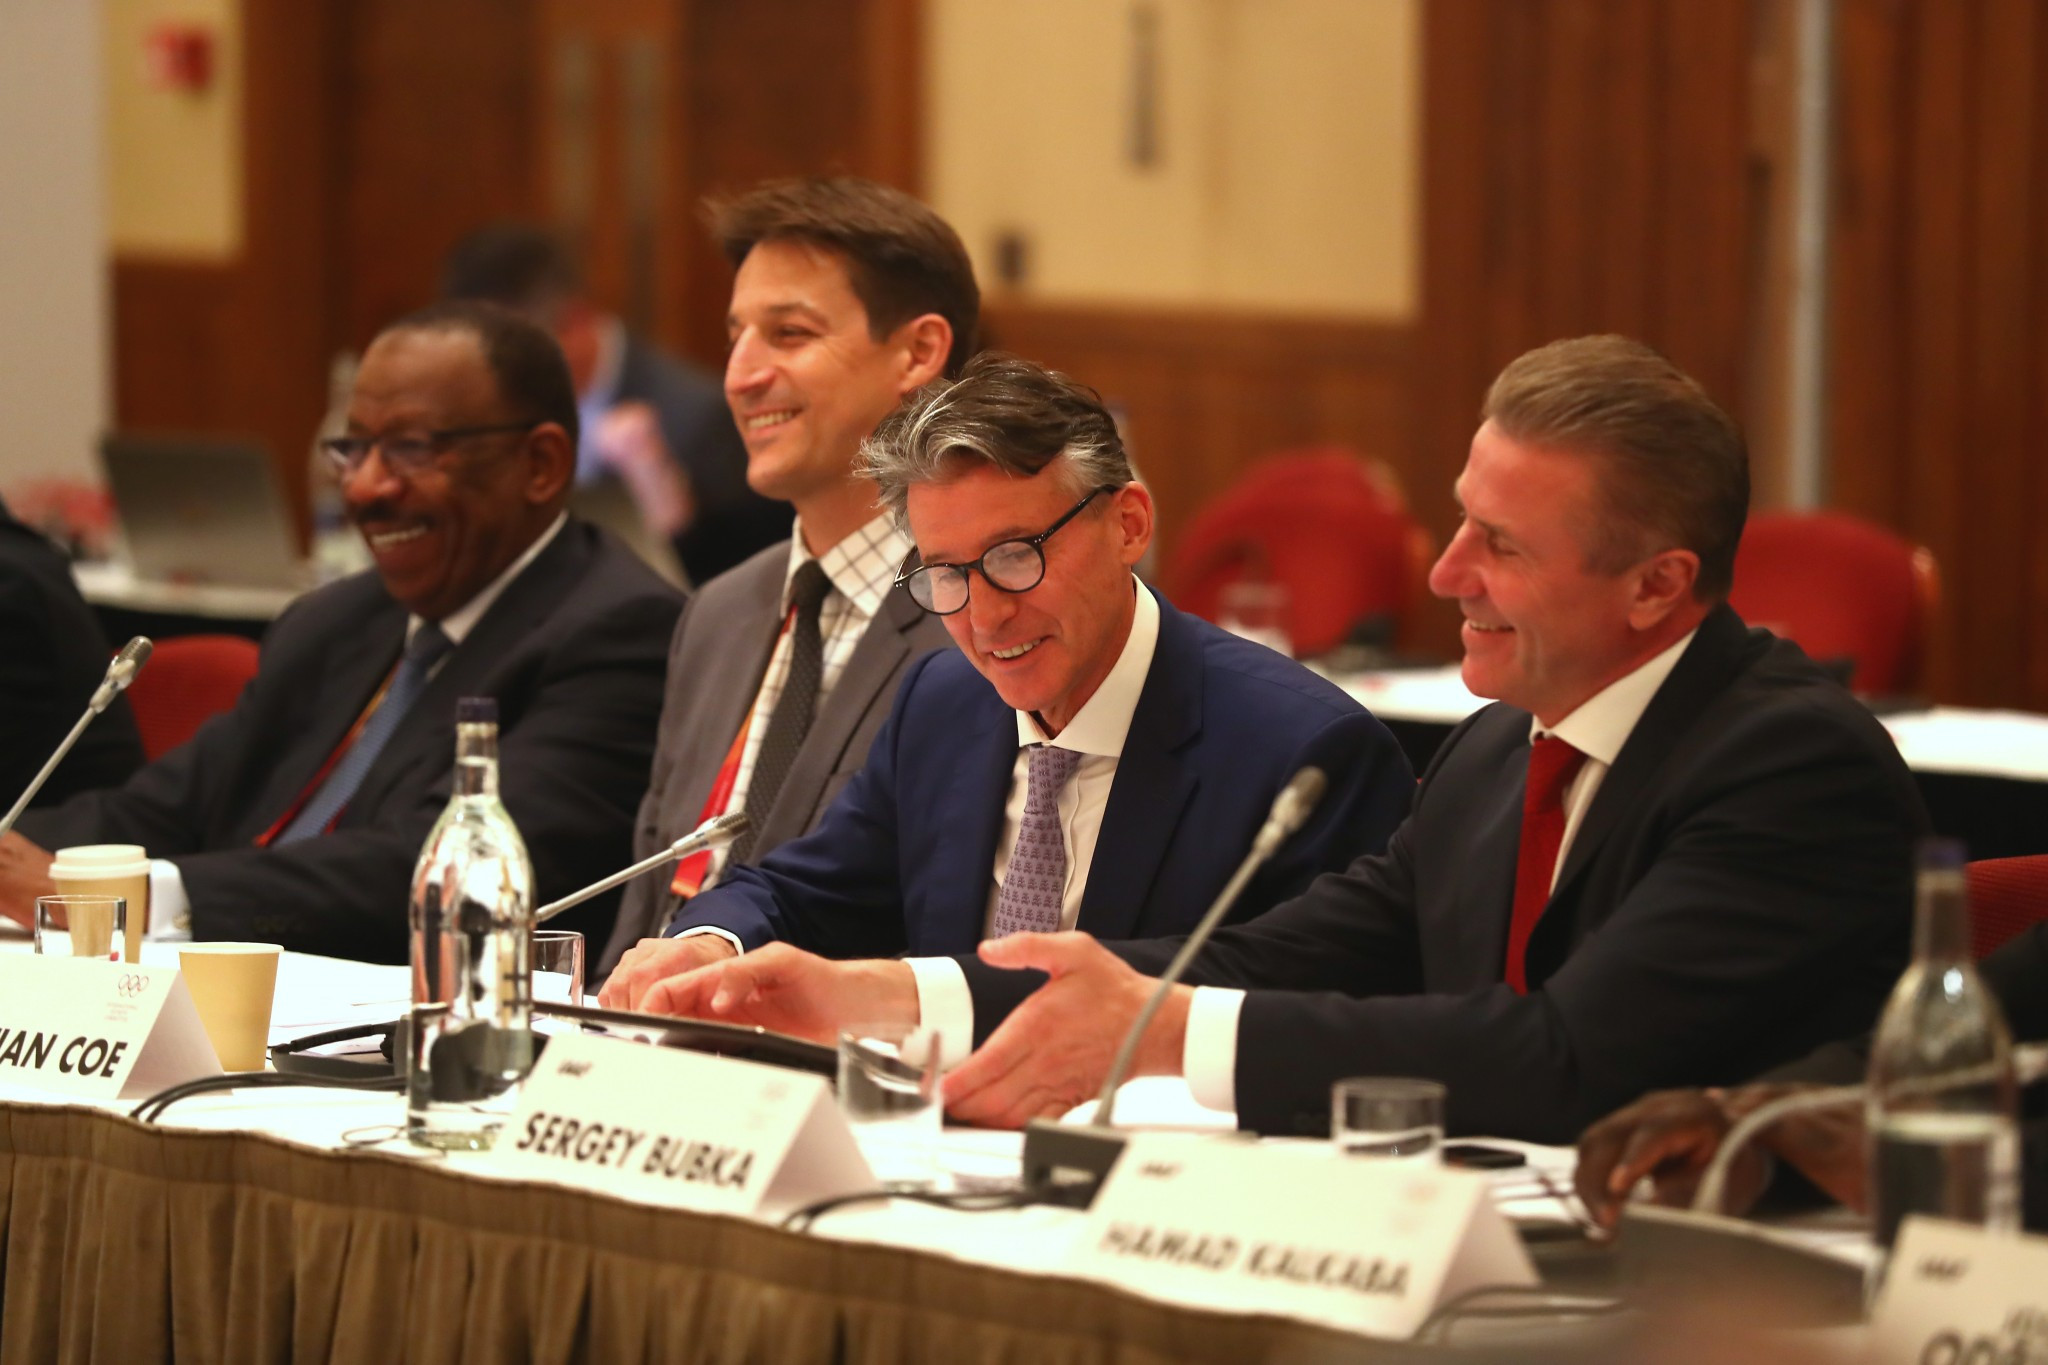 Sebastian Coe, second right, claims to be prioritising ongoing reforms within the IAAF ©Getty Images